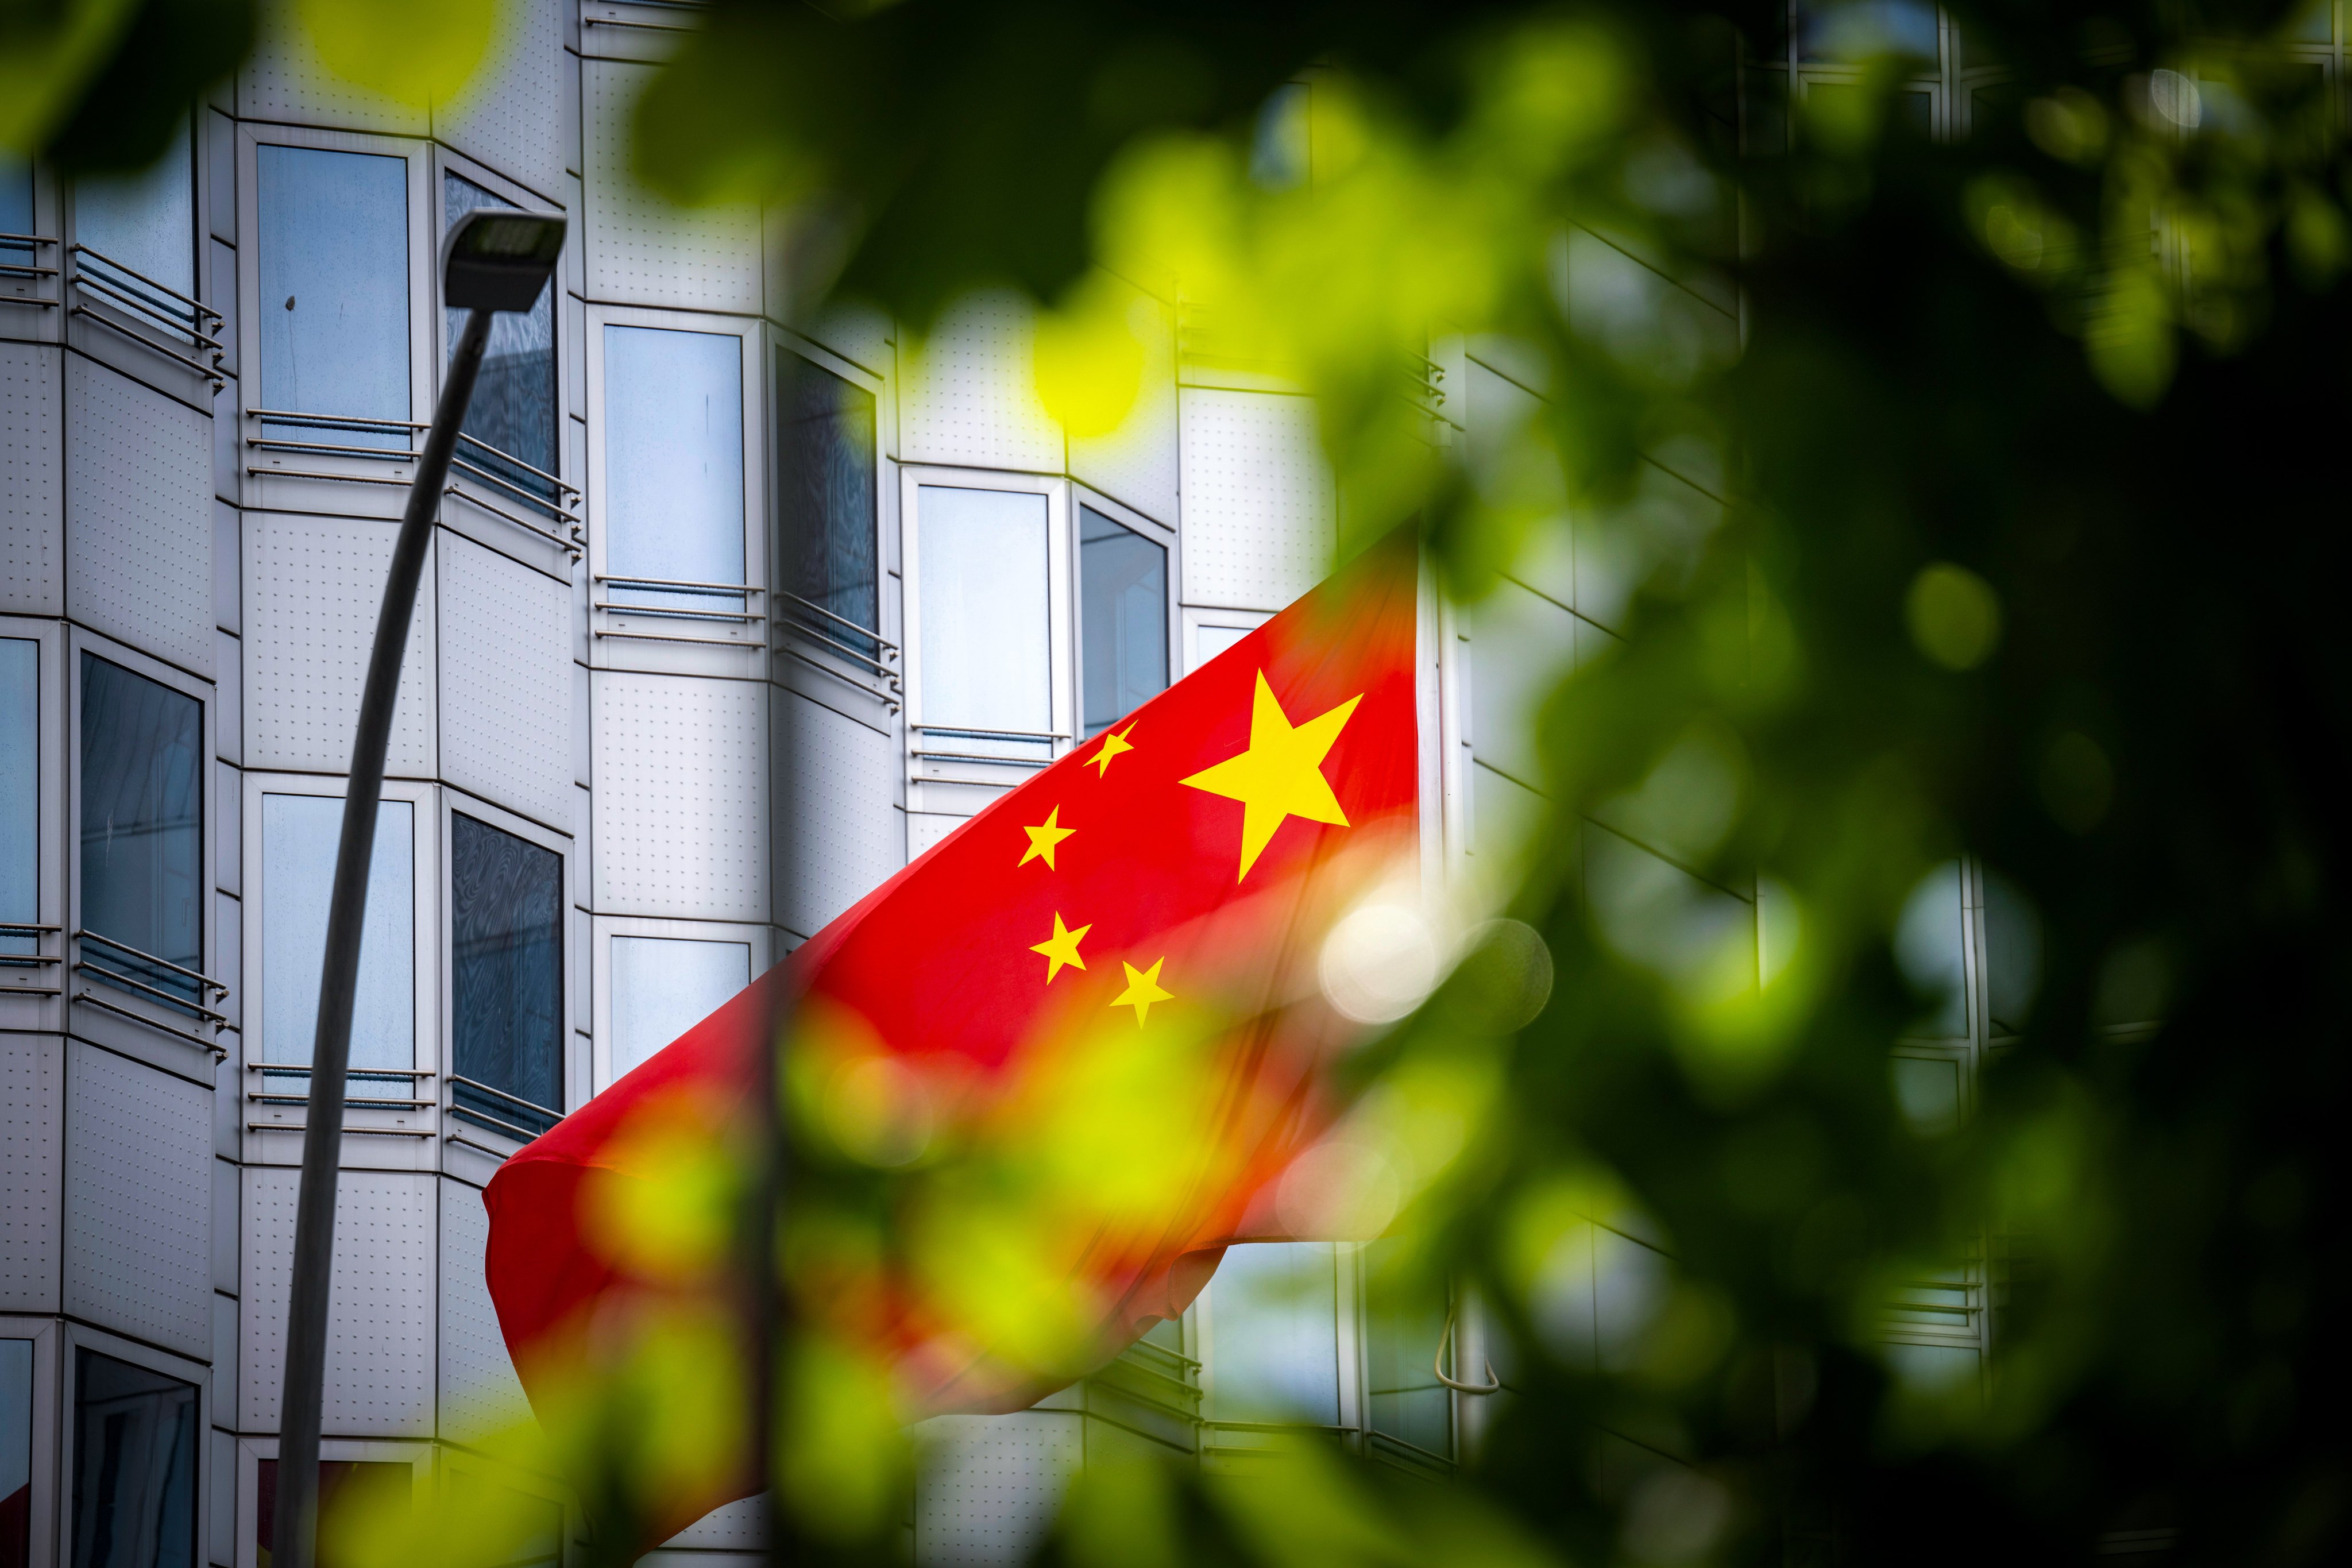 Berlin stopped short of revealing further details about the urgent meeting with the Chinese official, including whether it had already taken place. Photo: AP